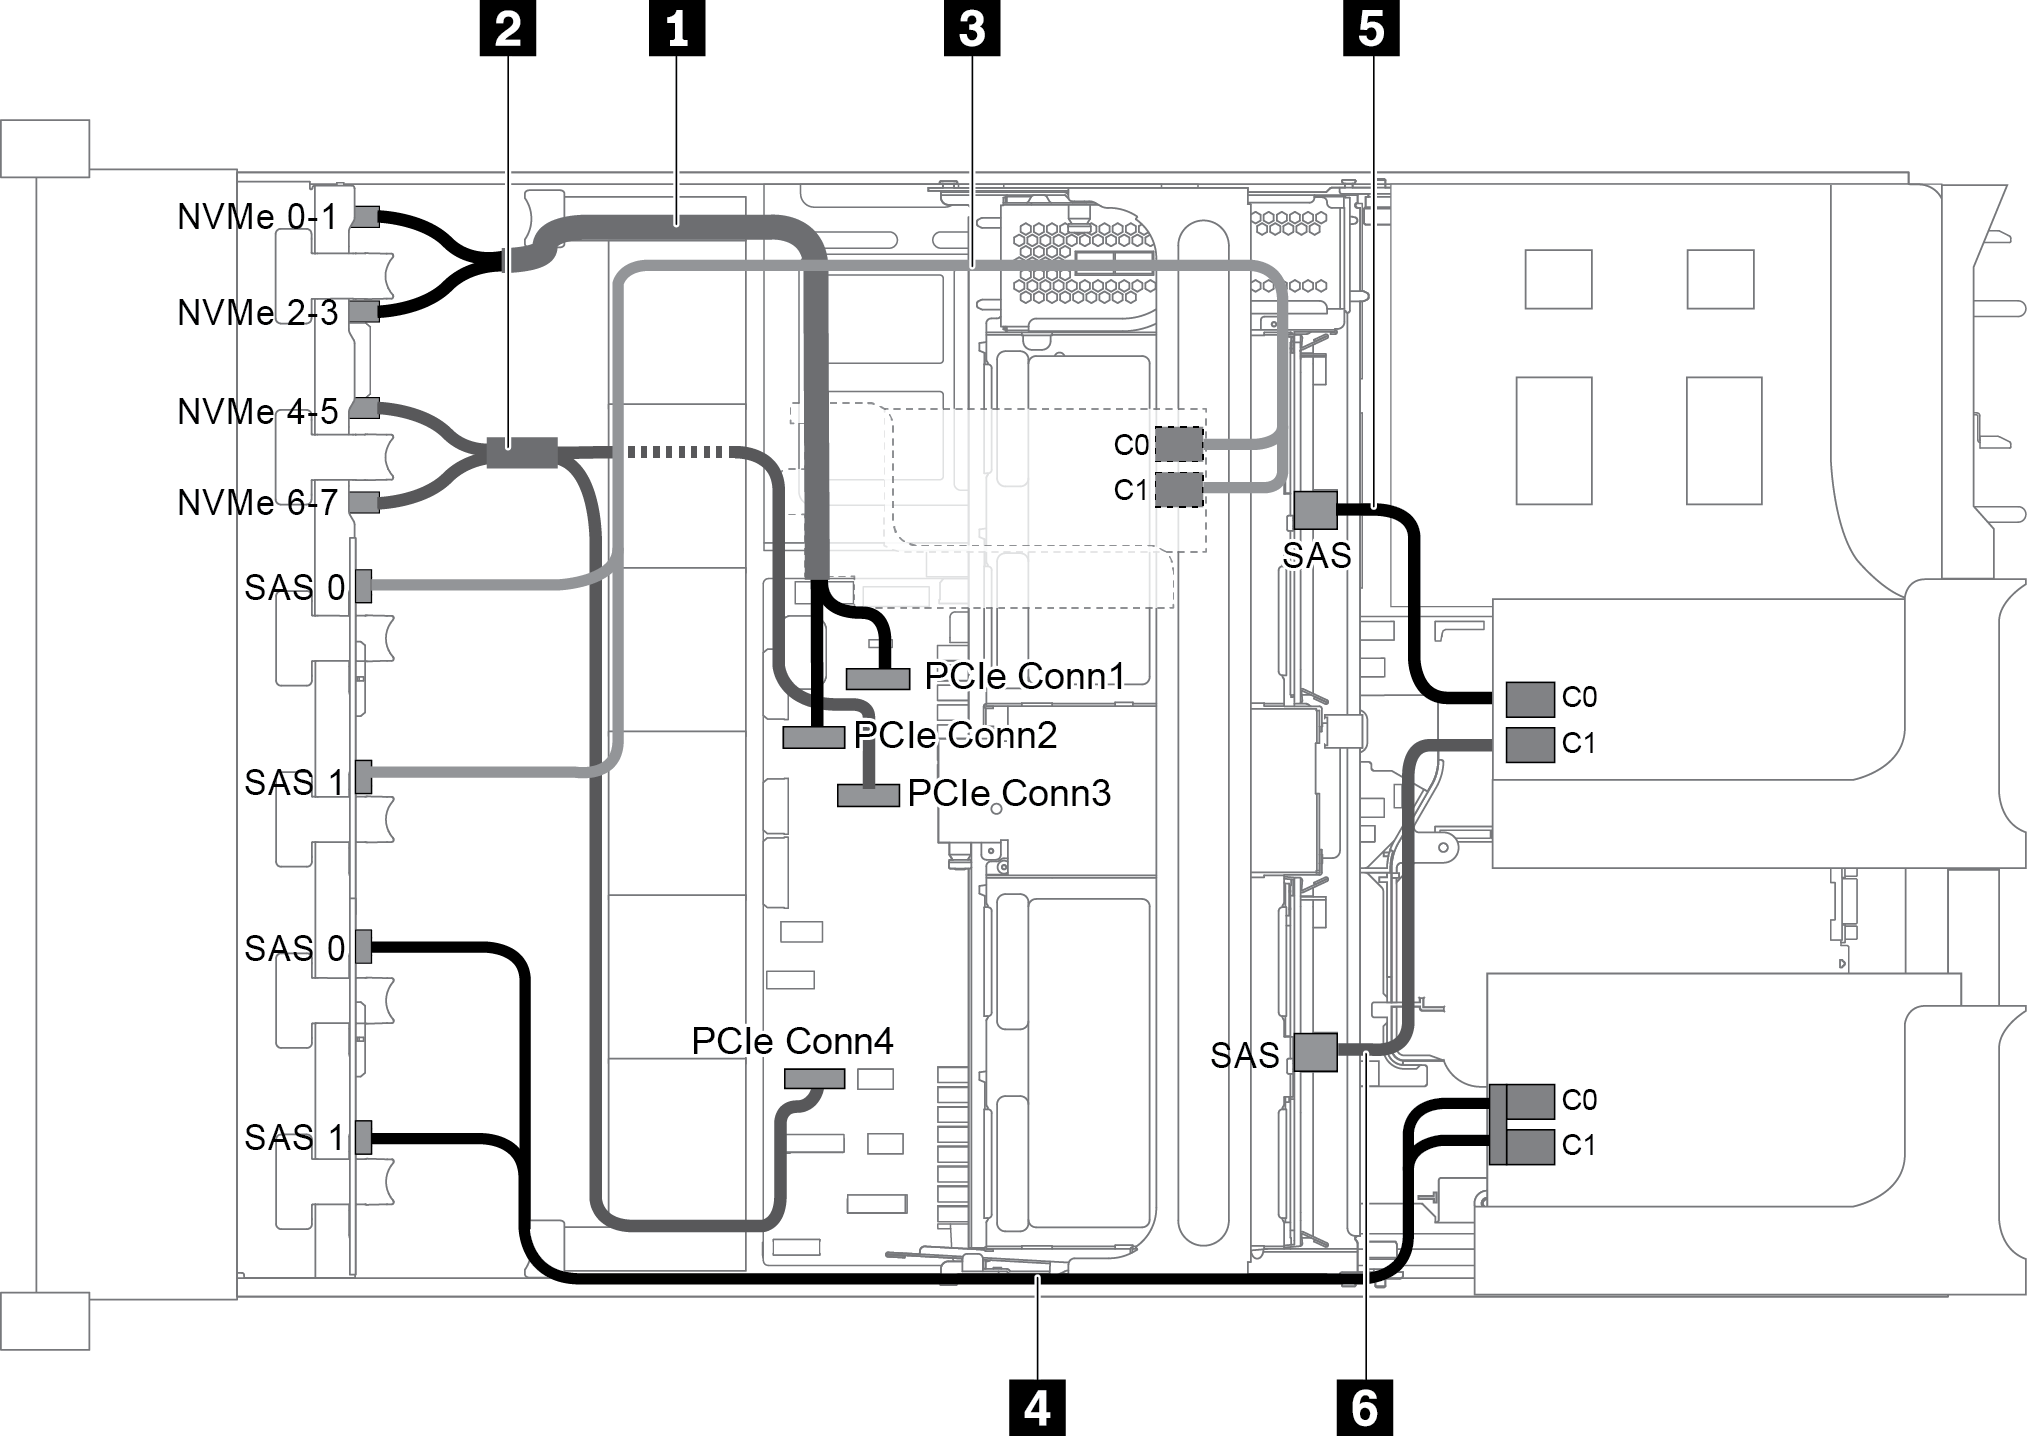 Cable routing for configuration with three front backplanes (8 NVMe + 2 x 8 SAS/SATA), one middle drive cage, and three 8i RAID/HBA adapters